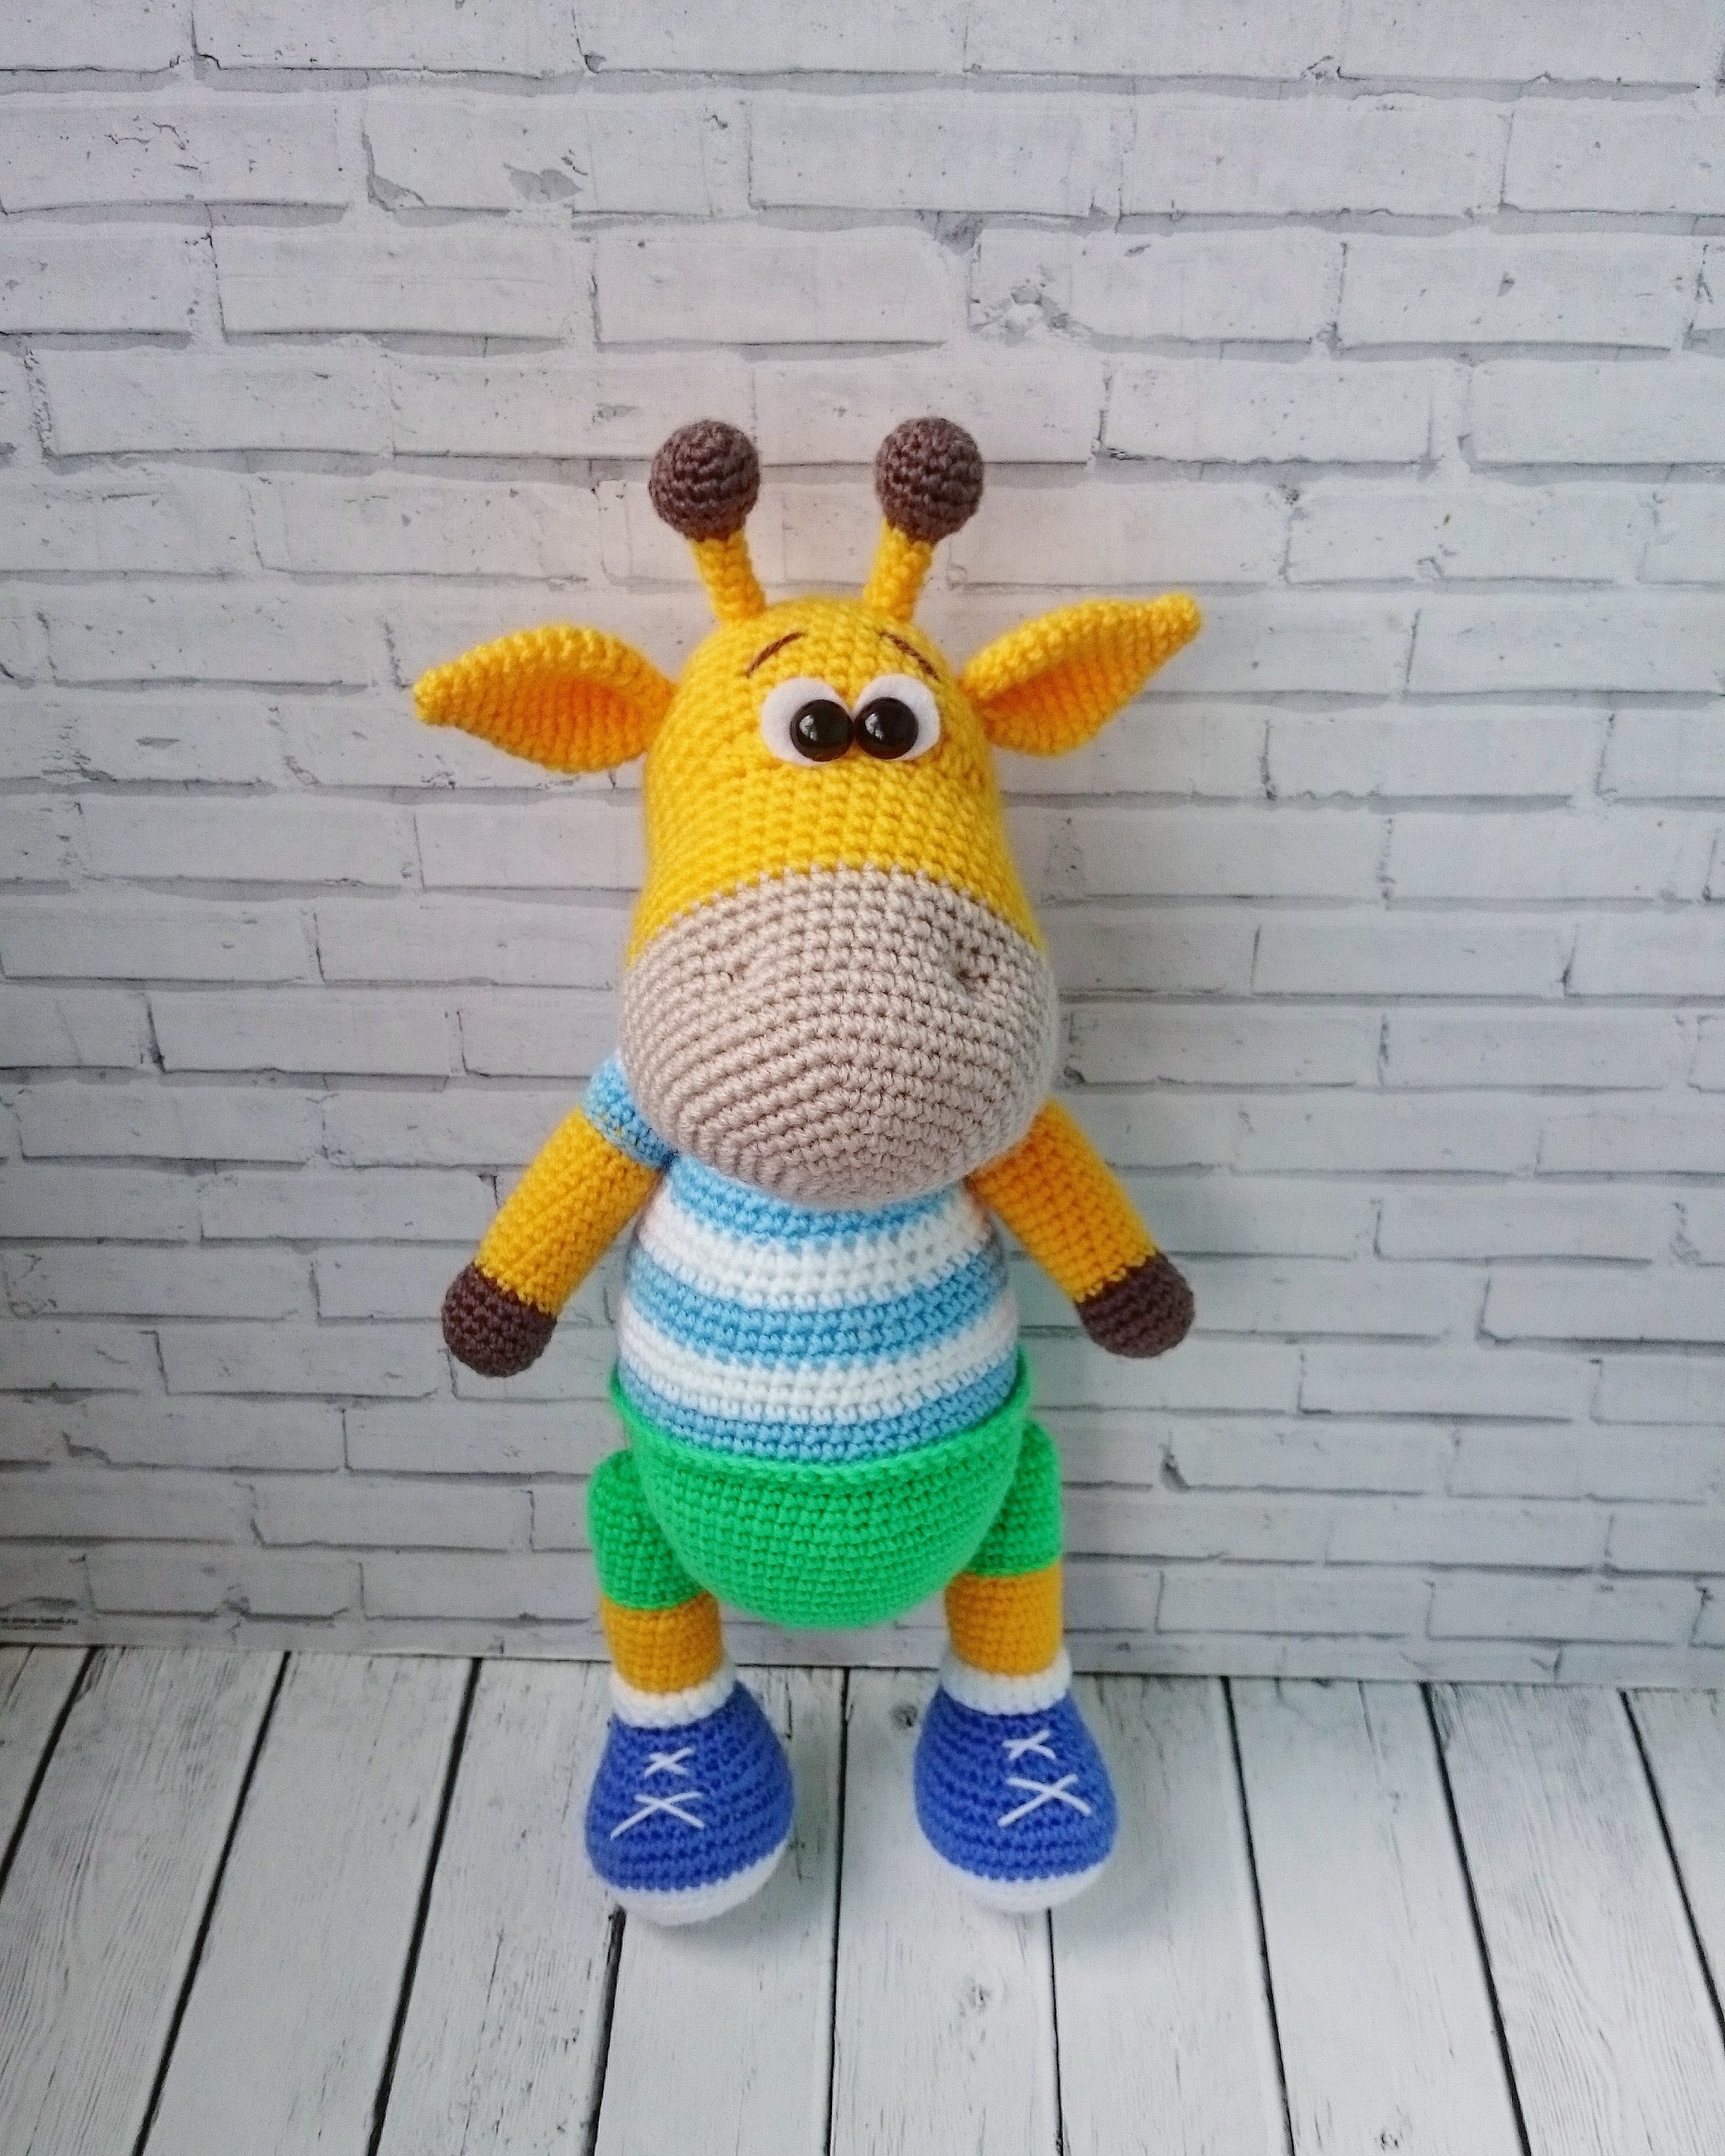 The knitting hobby is back - My, Needlework without process, Hobby, Knitted toys, Longpost, Needlework, Crochet